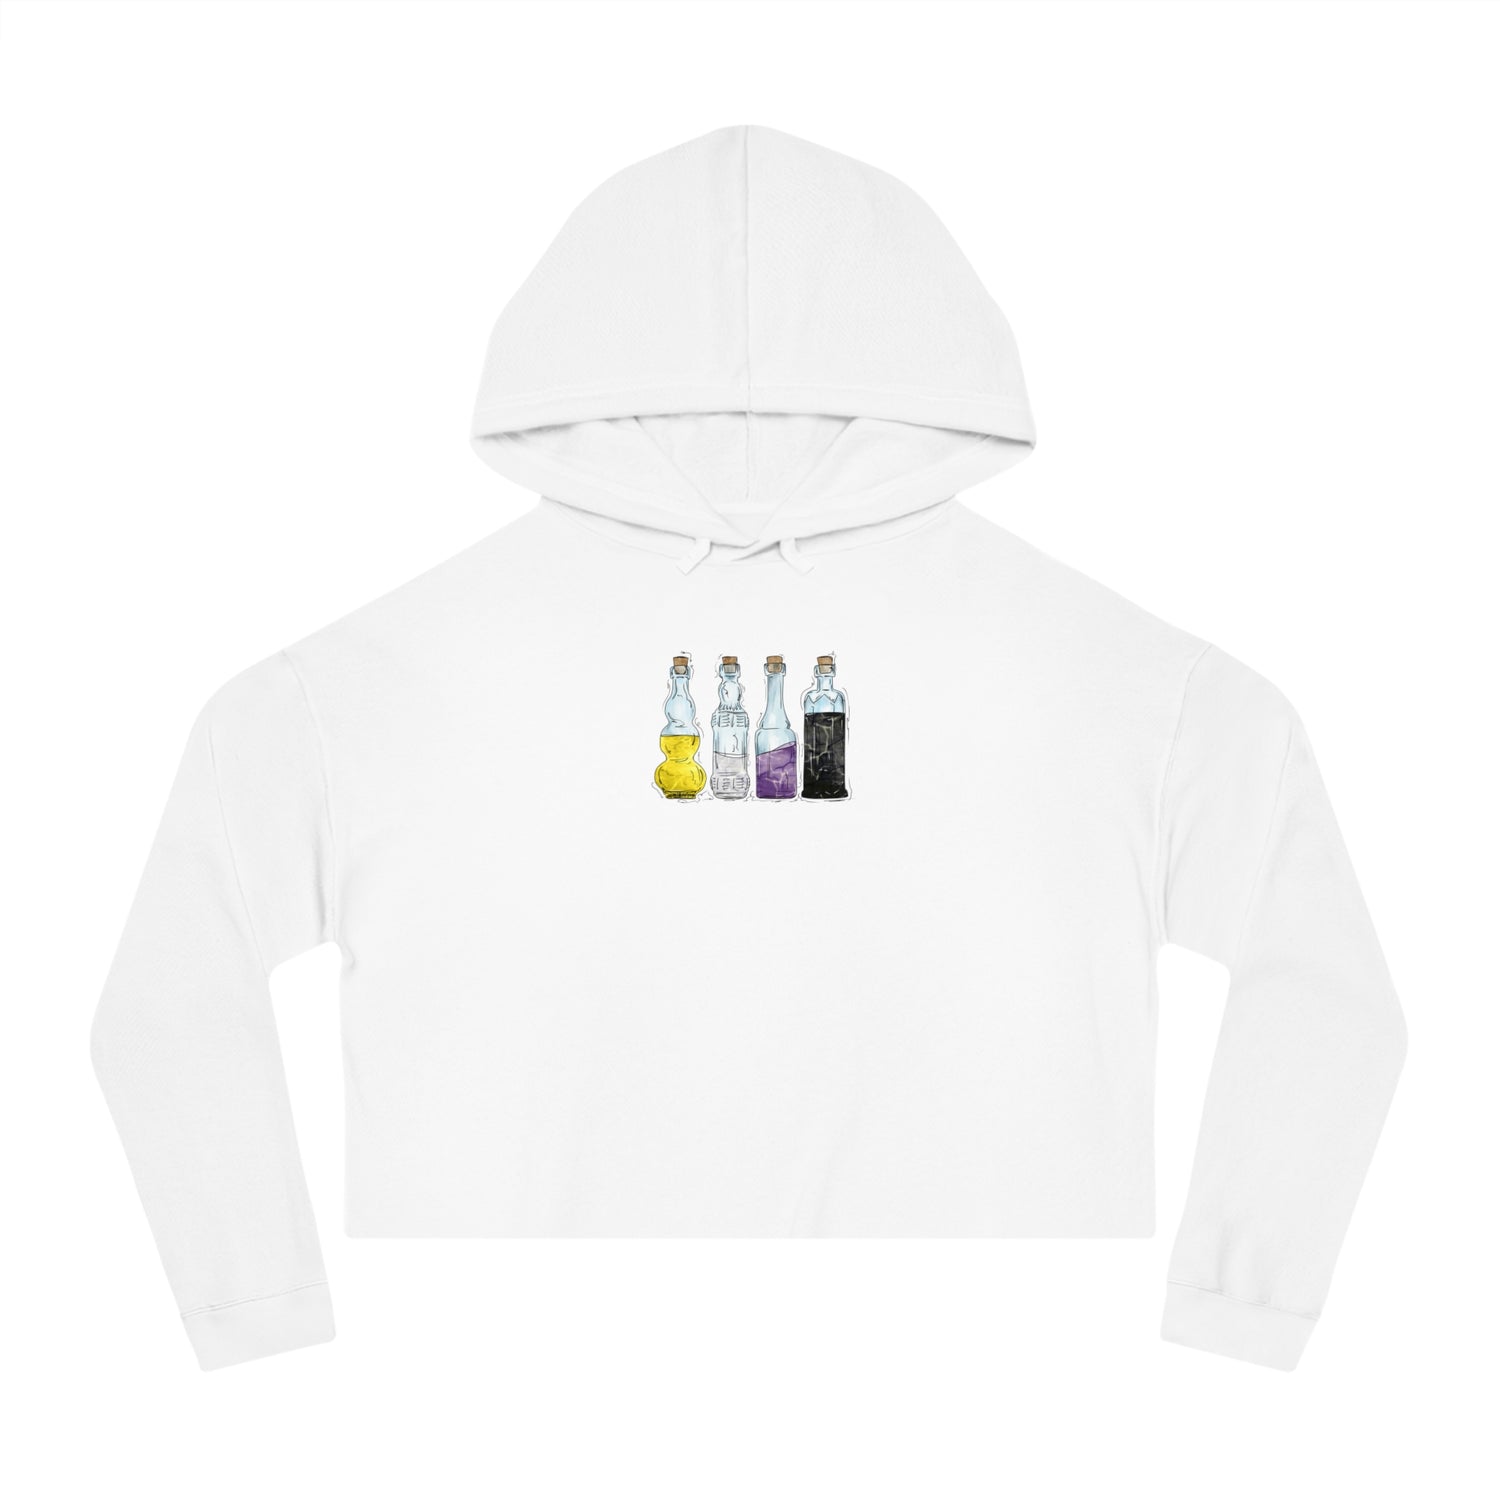 Nonbinary Pride - Cropped Hoodies